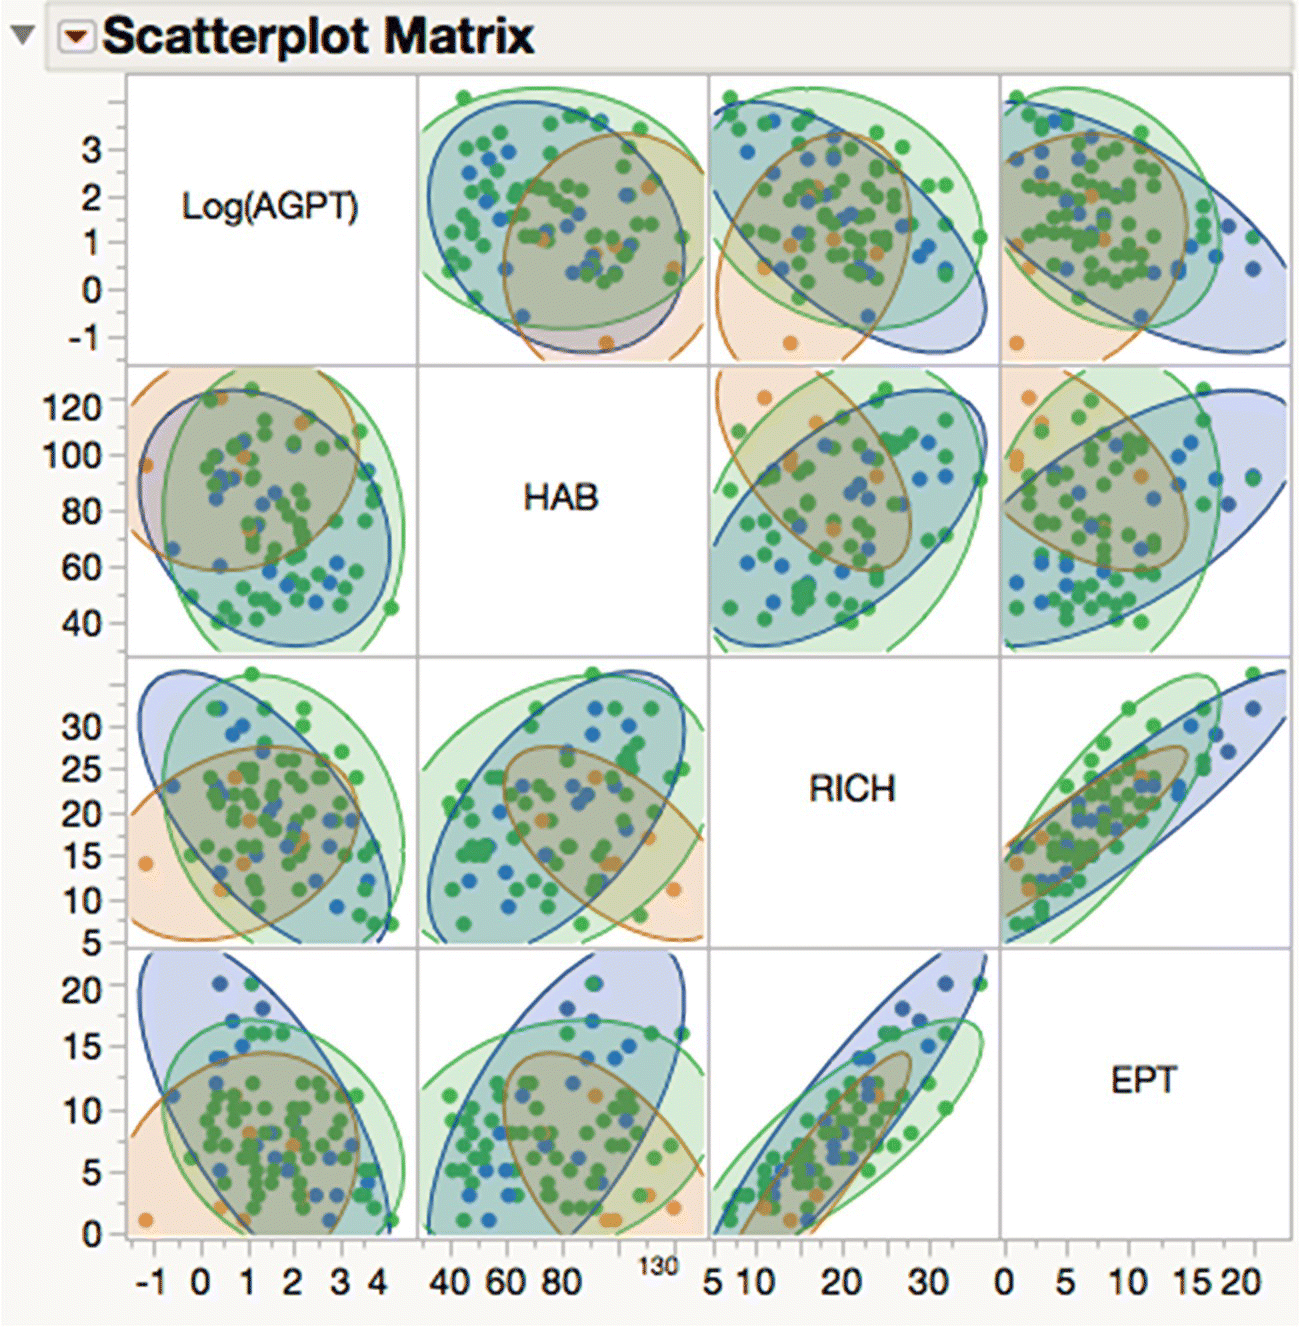 Scatterplot matrix of bivariate correlation of Ys, with boxes for Log(AGPT), HAB, RICH, and EPT.